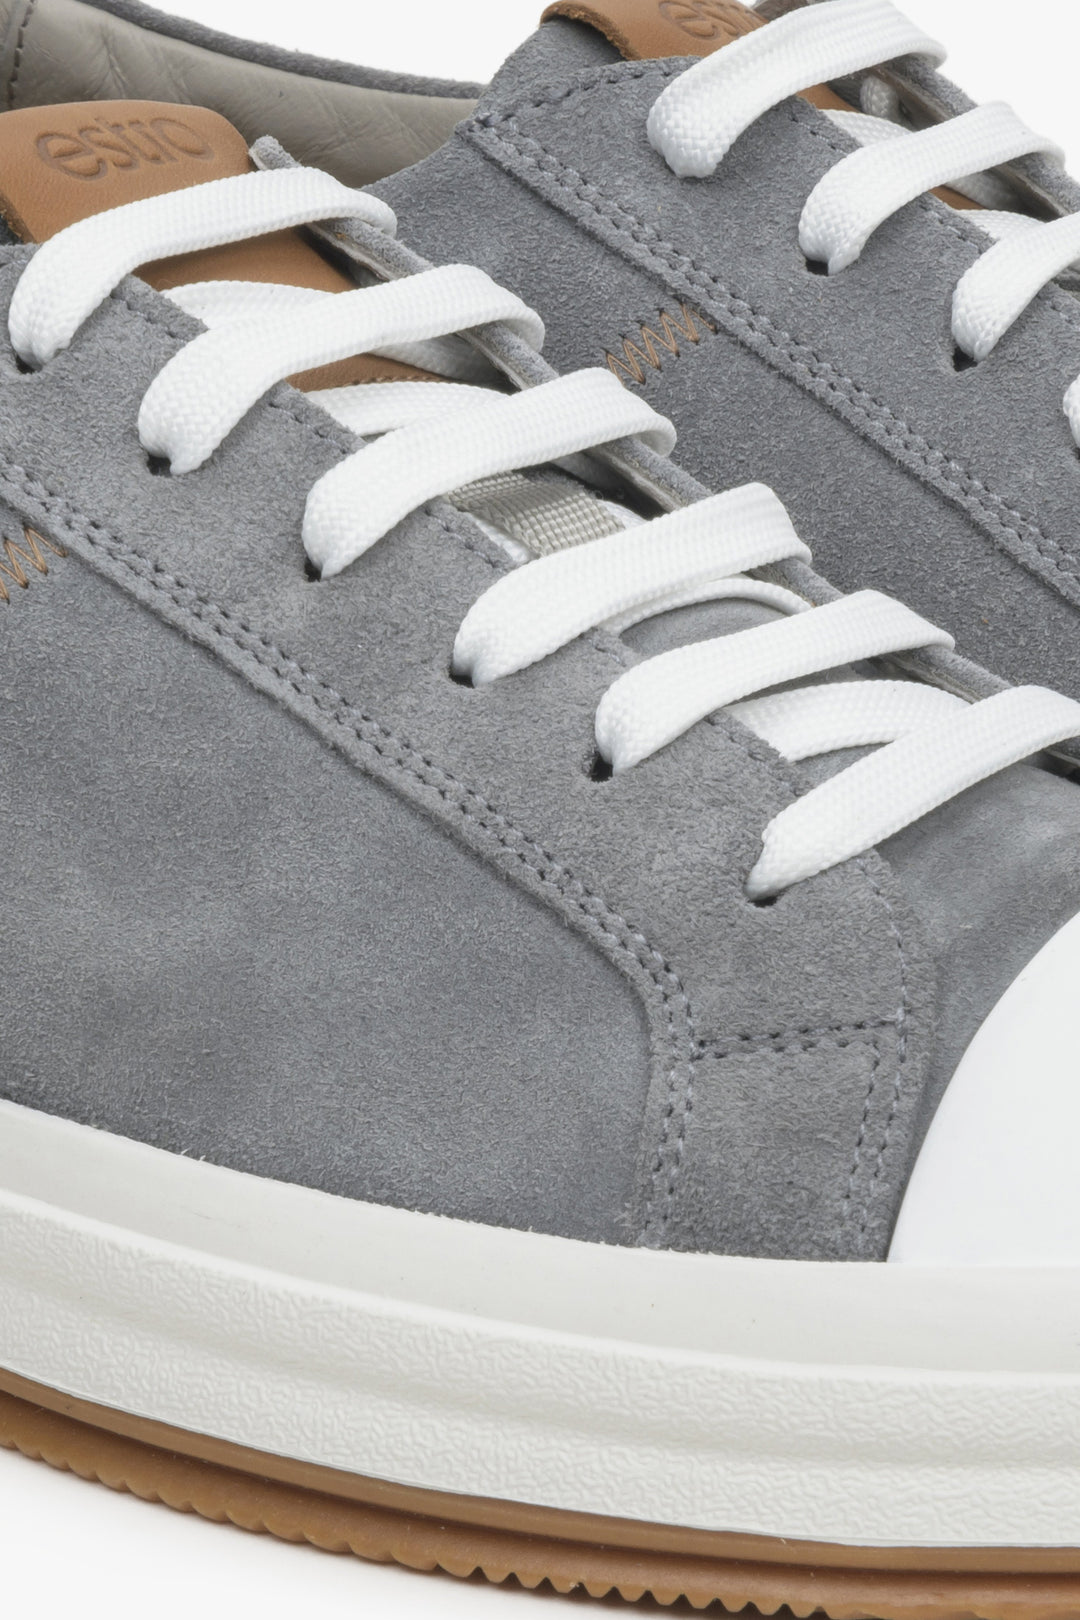 Men's grey sneakers made of genuine velour - close-up on details.